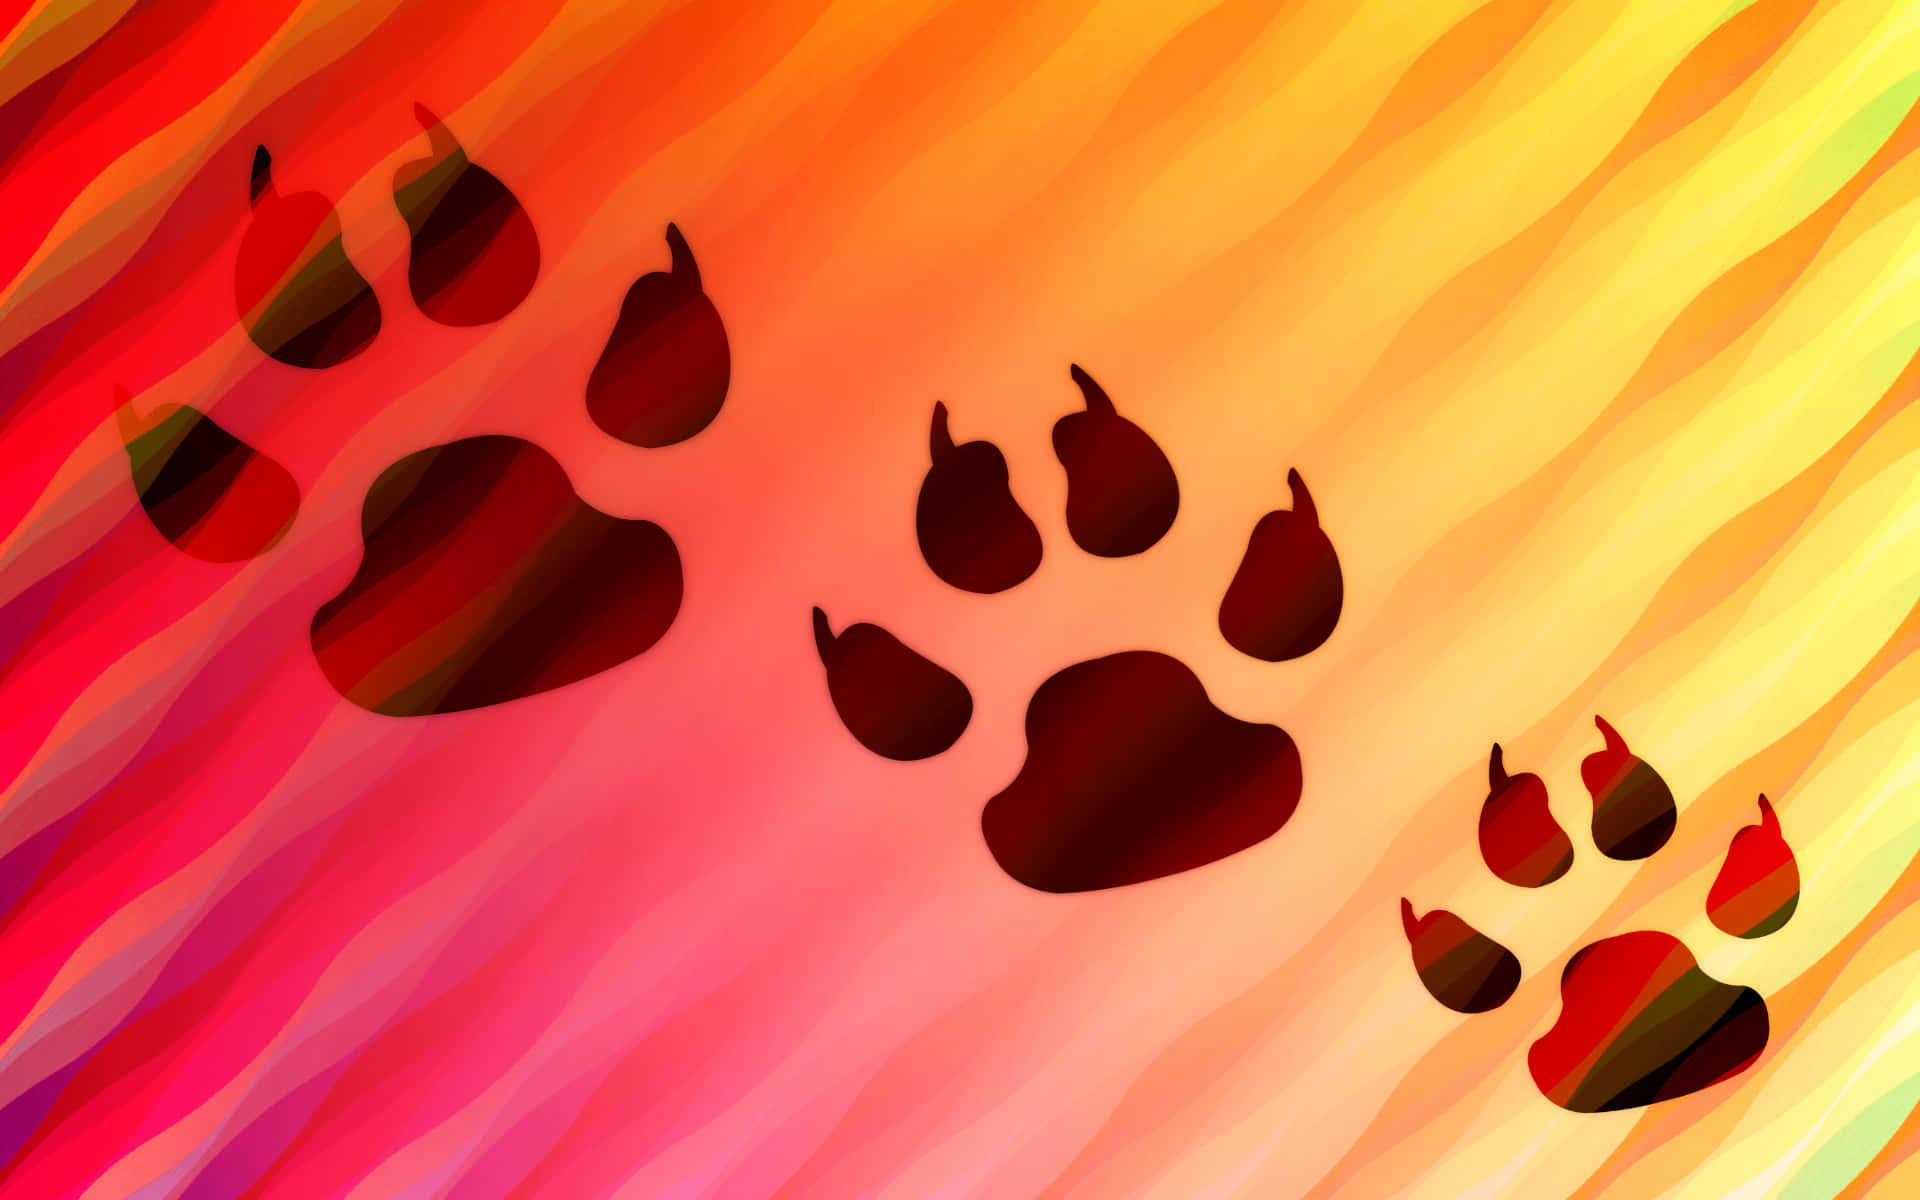 A Colorful Background With Paw Prints On It